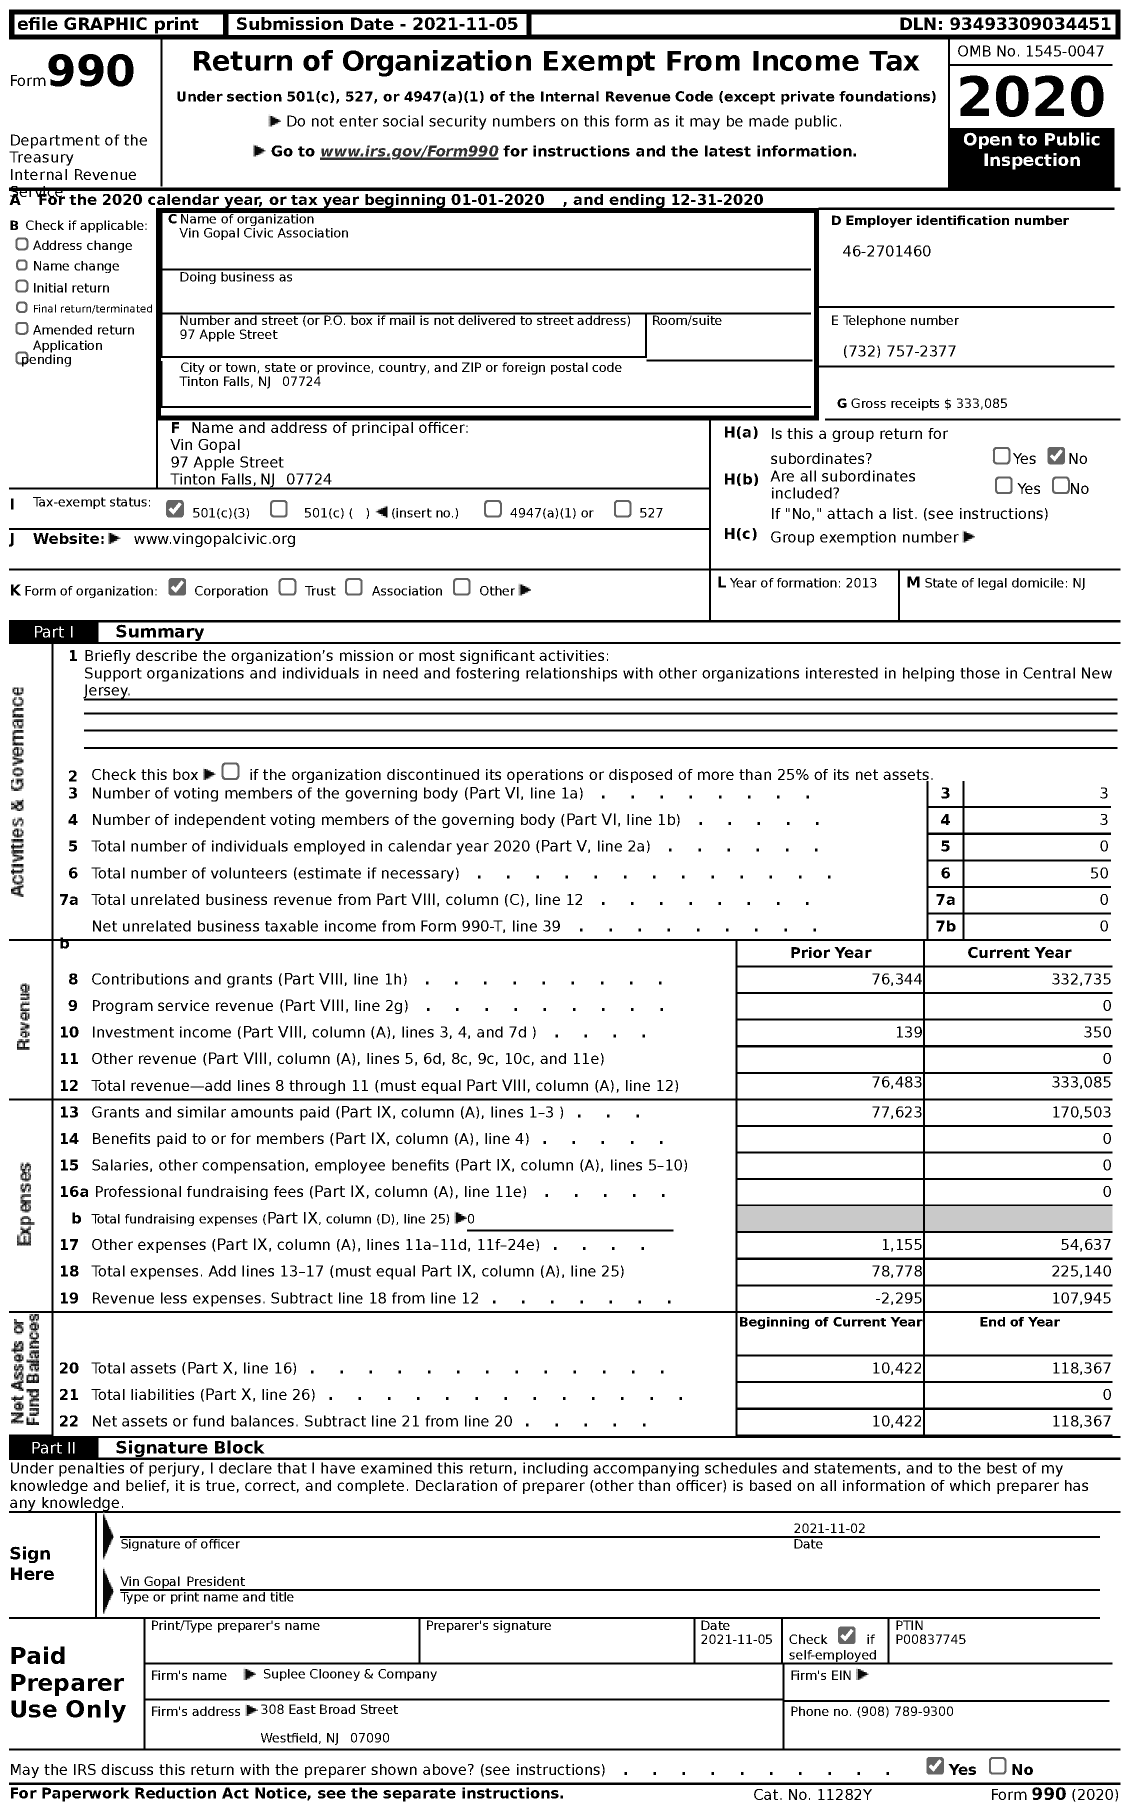 Image of first page of 2020 Form 990 for Vin Gopal Civic Association